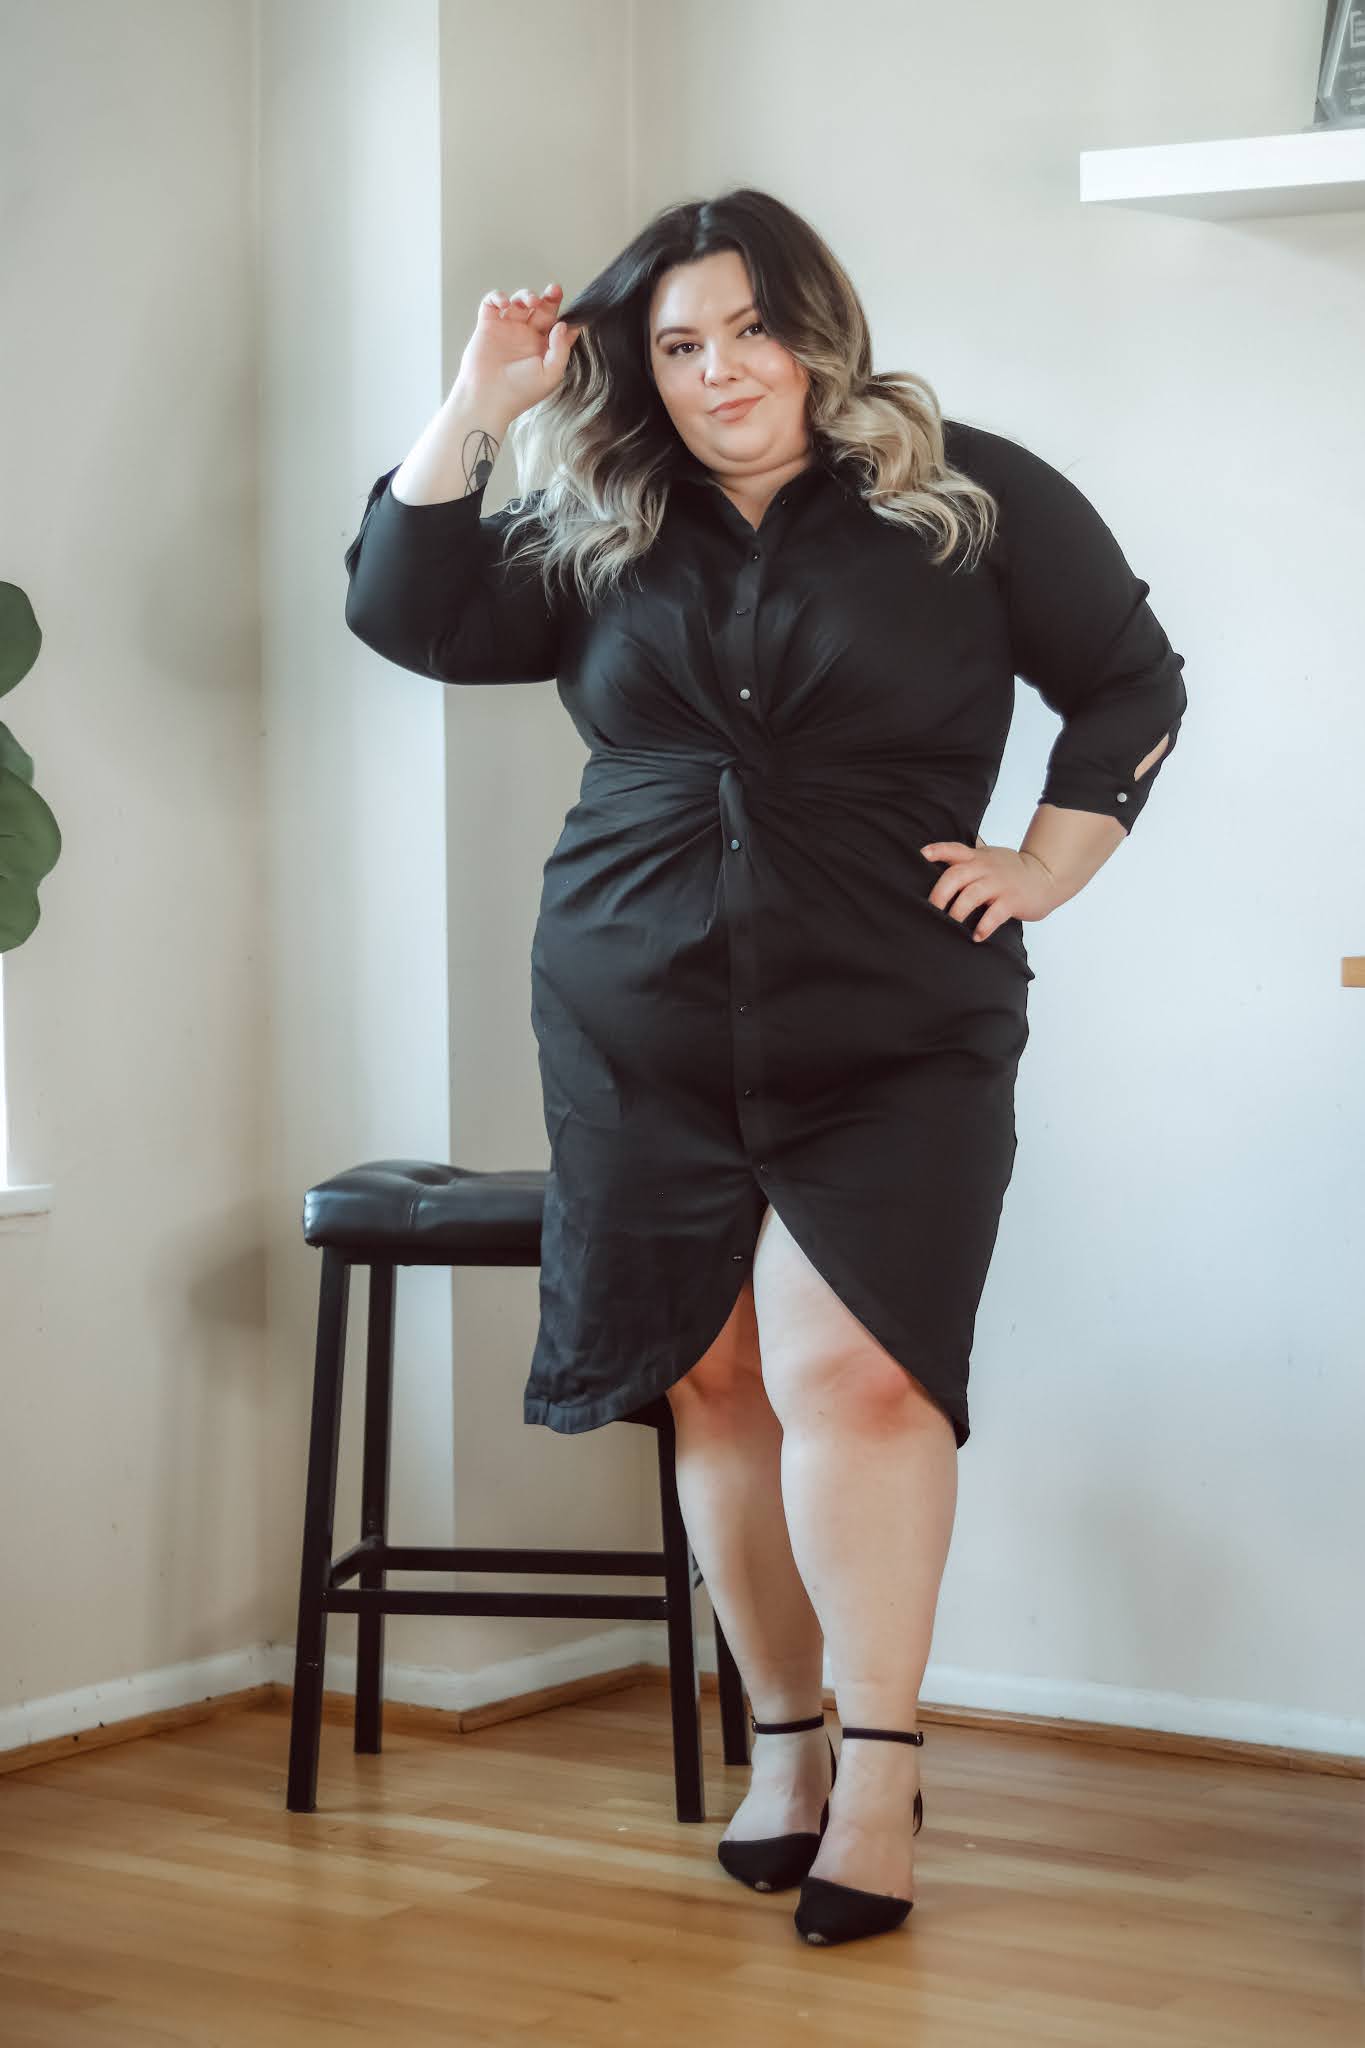 Chicago Plus Size Petite Fashion Blogger Natalie in the City shares her favorite work dresses